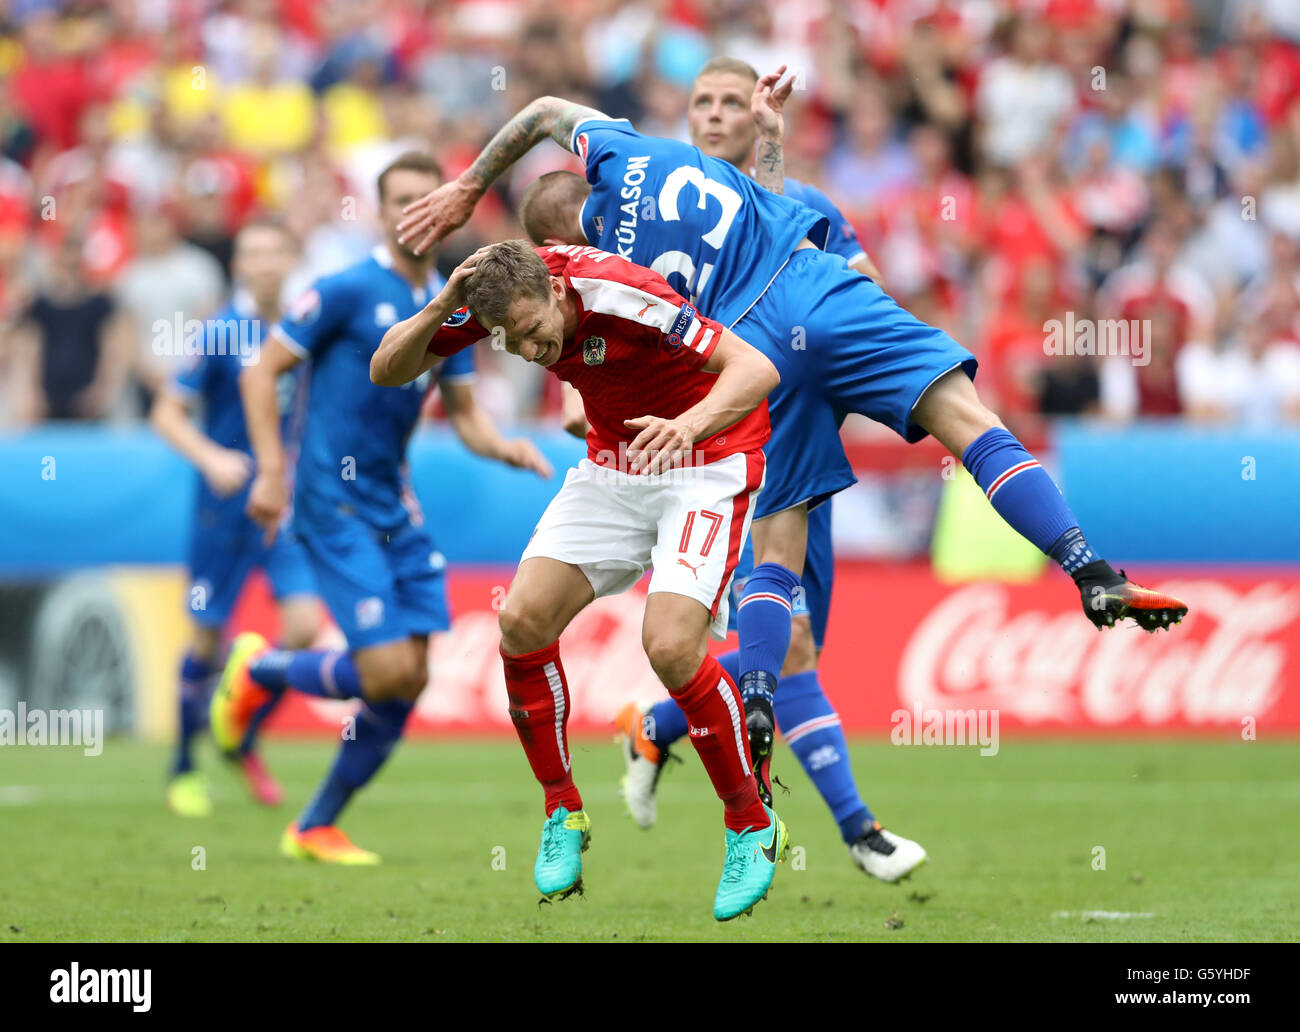 Austria's Florian Klein (left) and Iceland's Ari Freyr Skulason battle for the ball in the air during the Euro 2016, Group F match at the Stade de France, Paris. Stock Photo